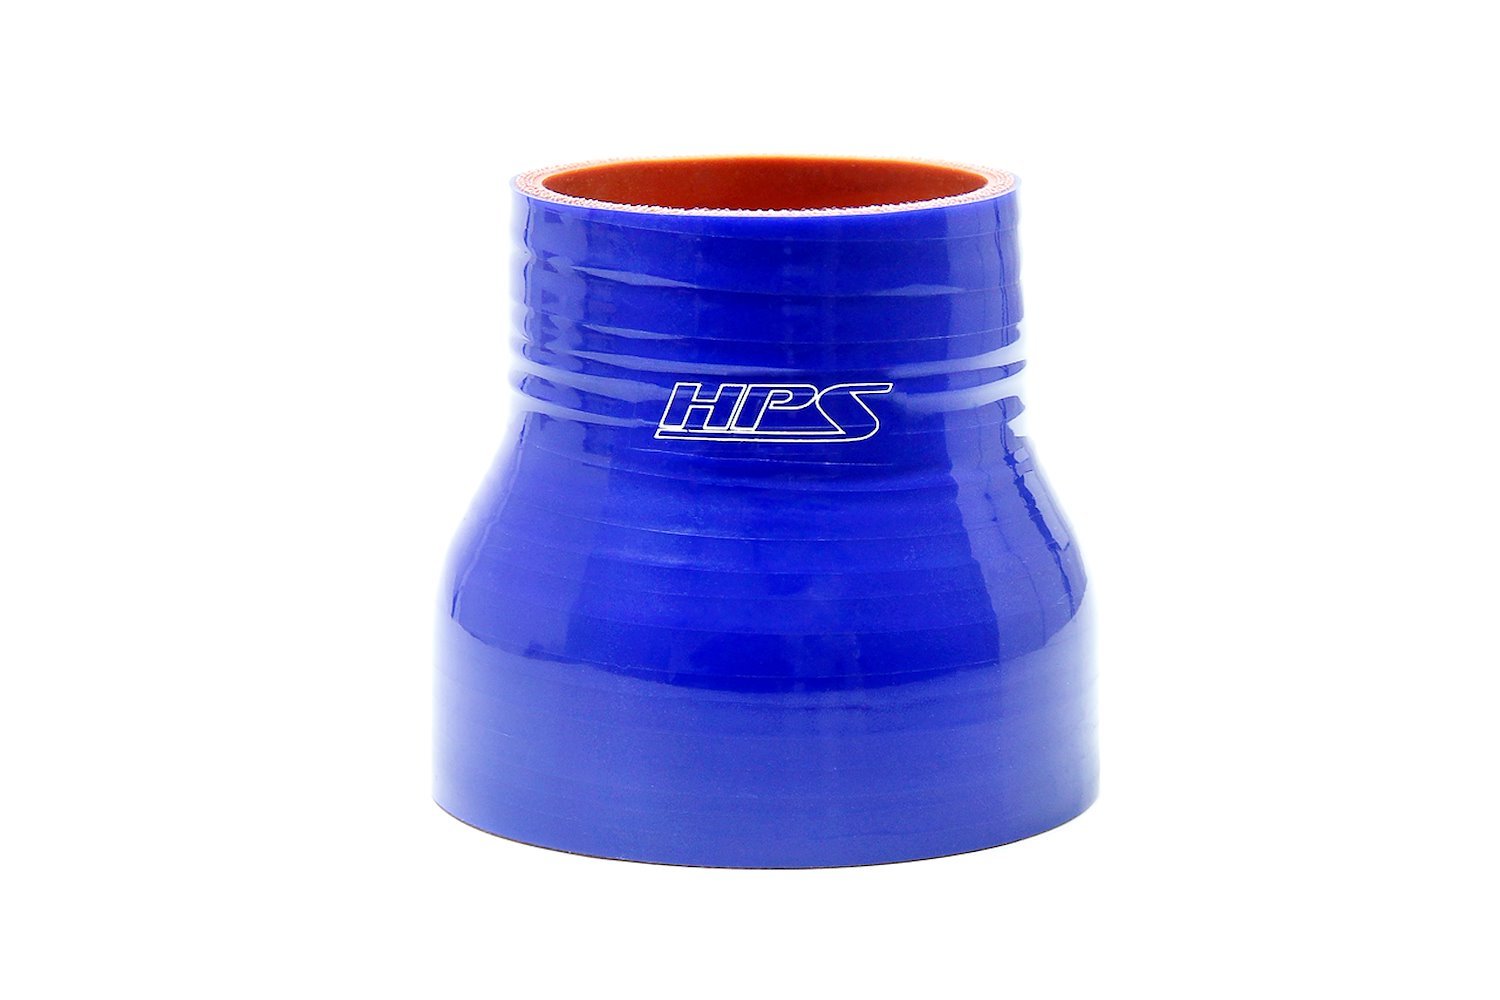 HTSR-238-250-BLUE Silicone Reducer Hose, High-Temp 4-Ply Reinforced, 2-3/8 in. - 2-1/2 in. ID, 3 in. Long, Blue